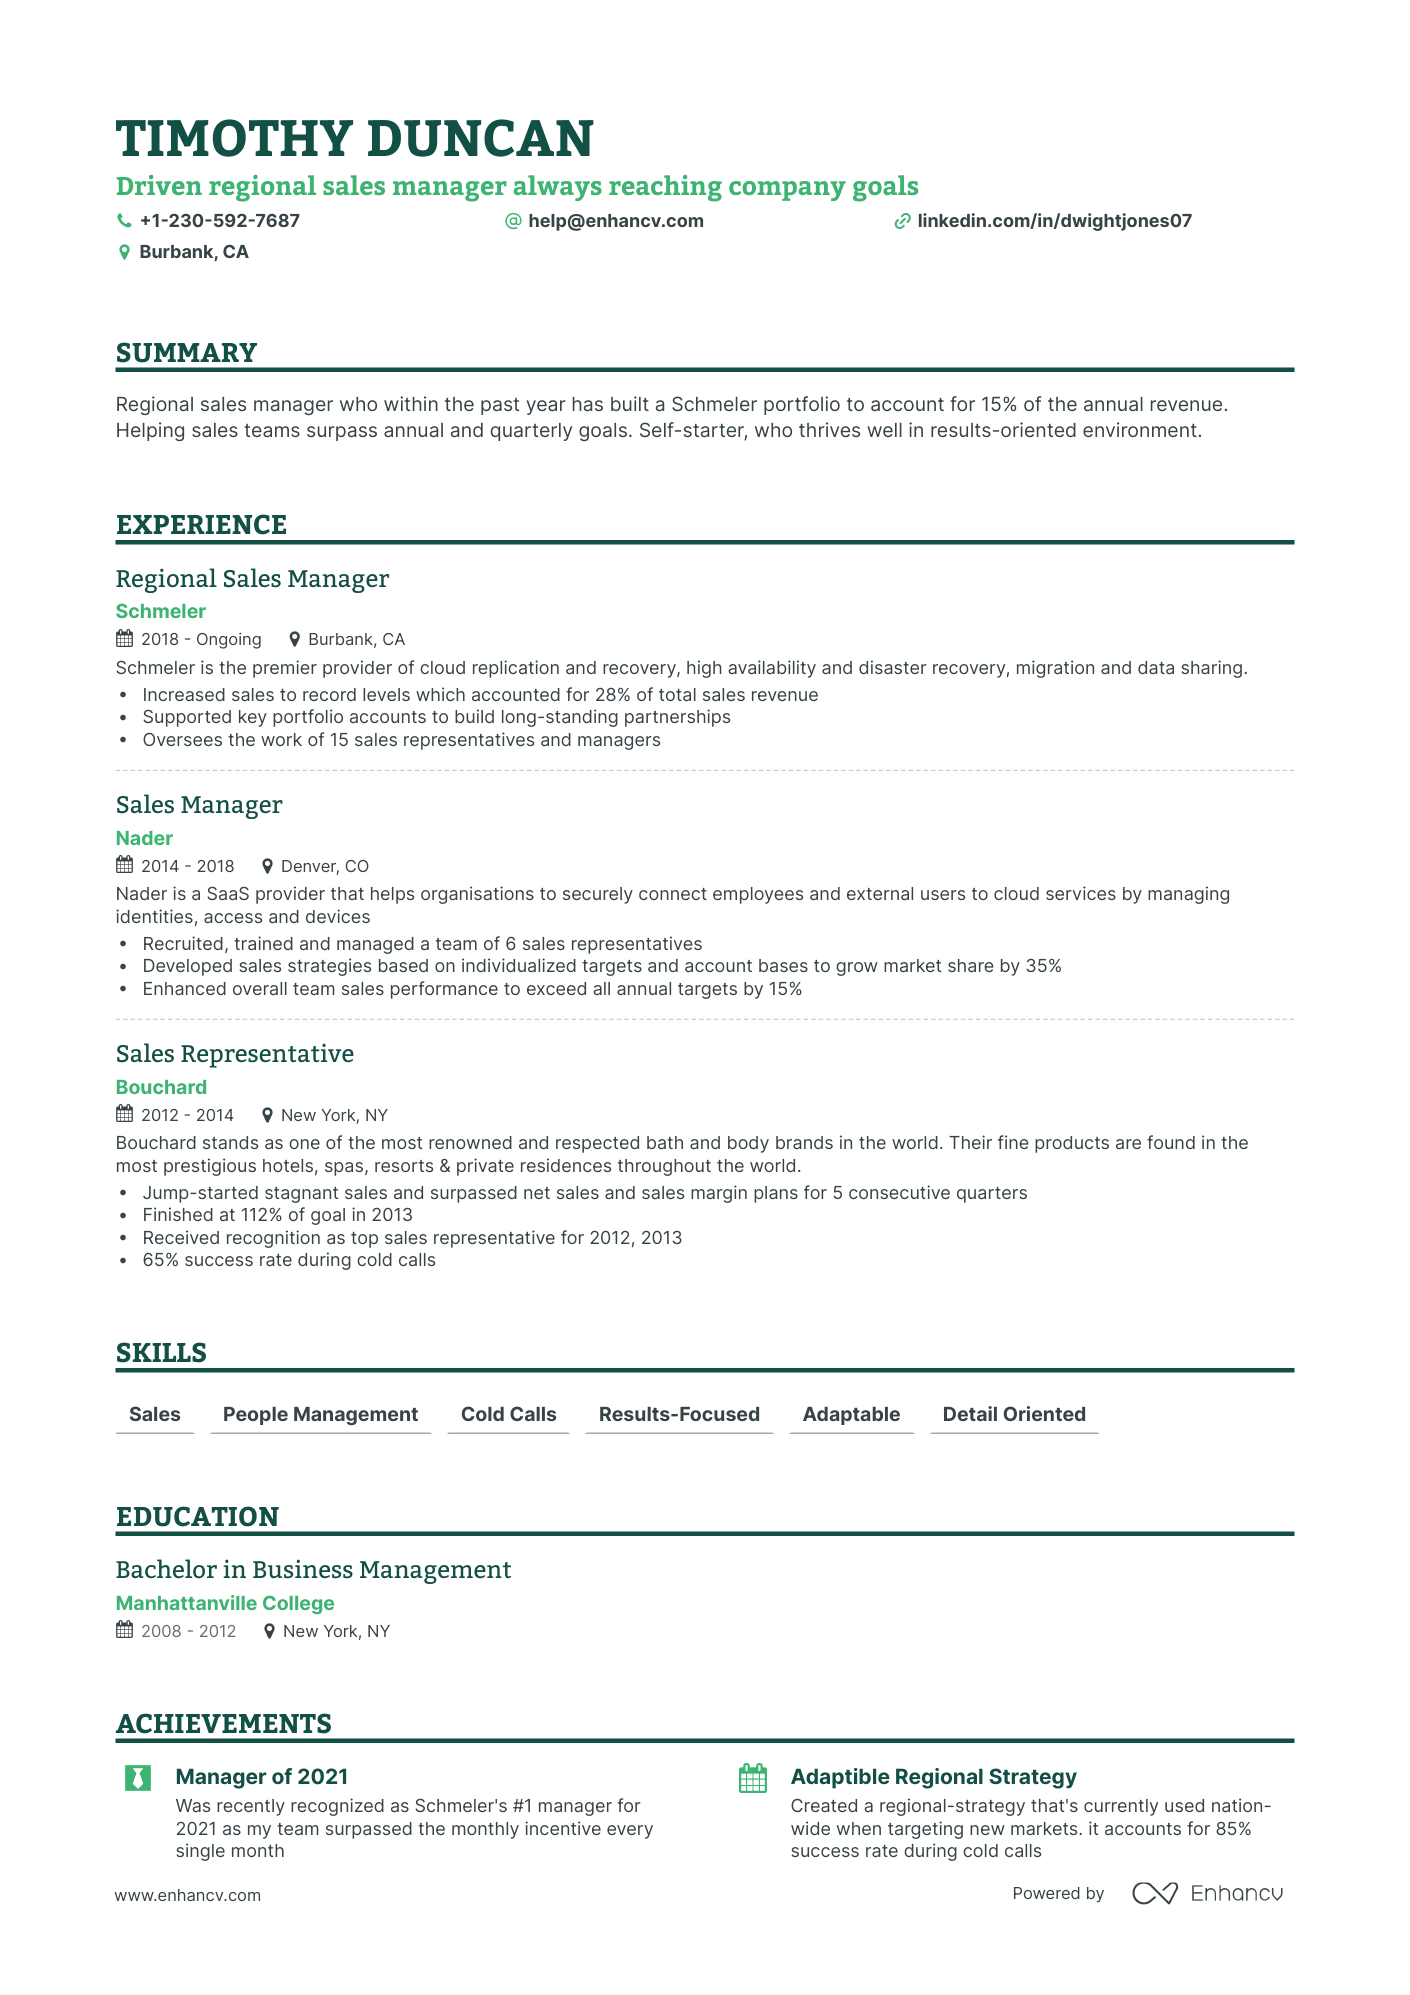 Classic Regional Sales Manager Resume Template